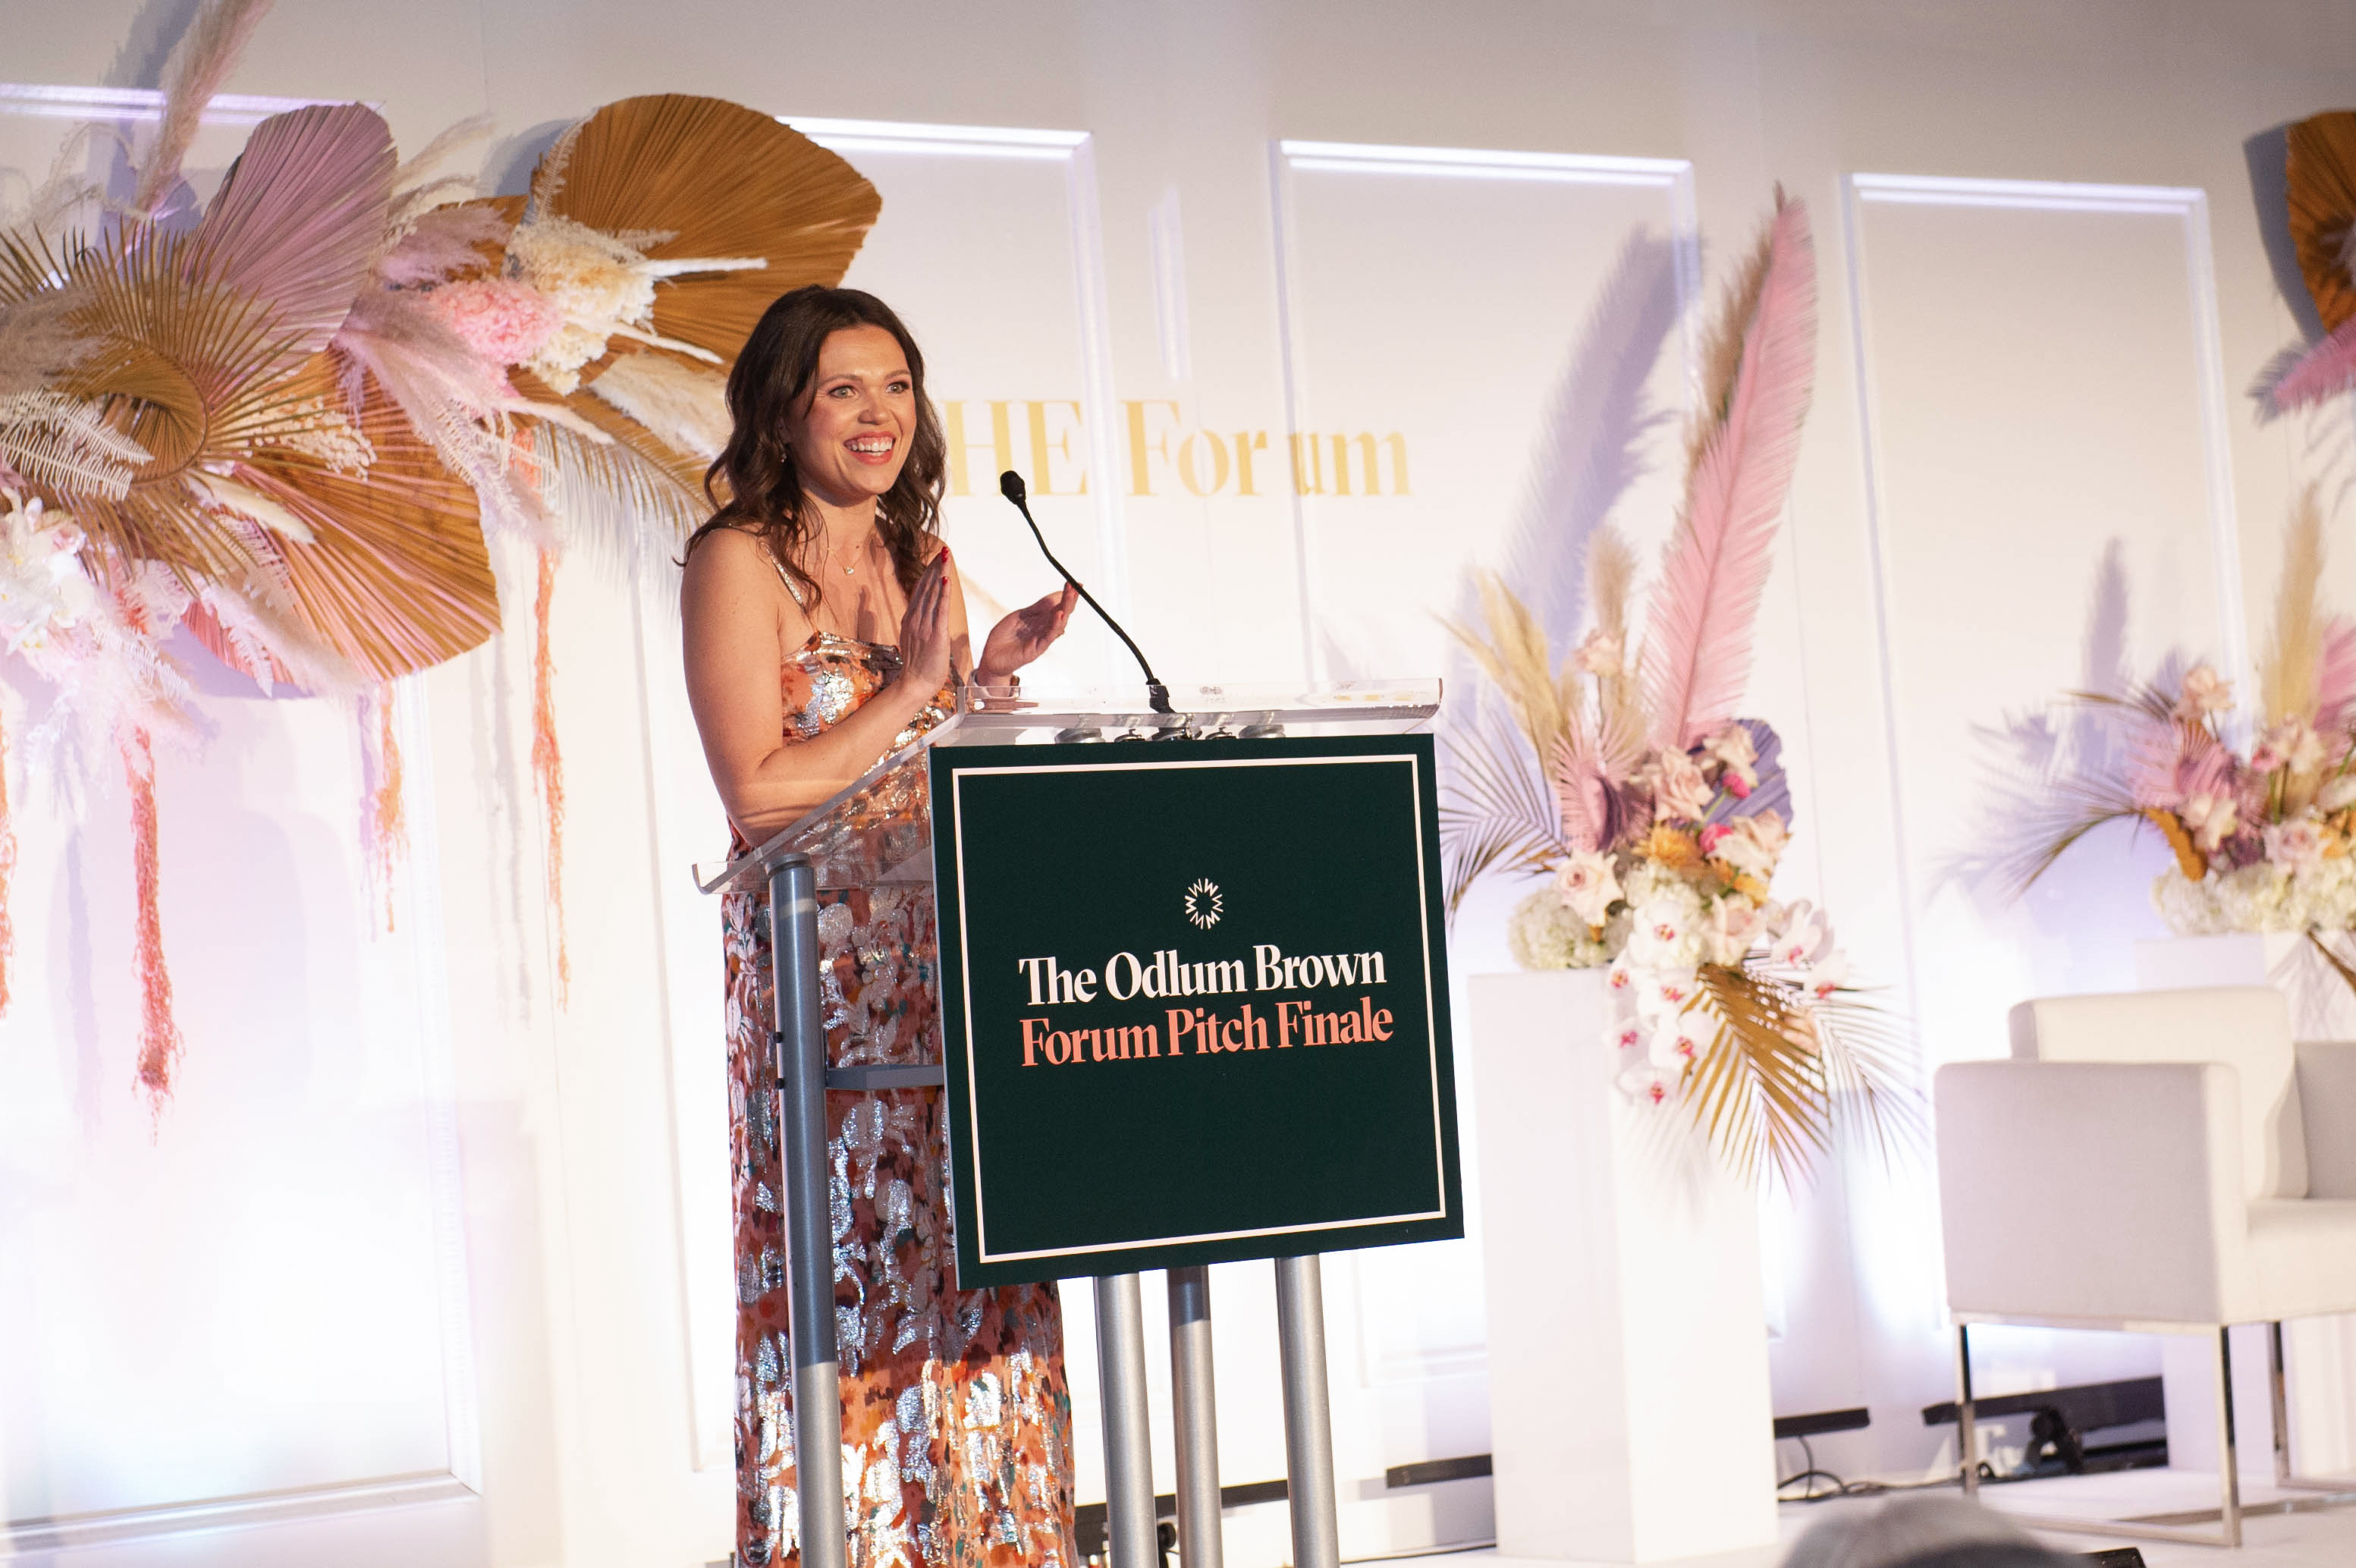 The Forum’s CEO, Paulina Cameron, congratulates this year’s prize recipients of The Odlum Brown Forum Pitch Finale at the Fairmont Hotel Vancouver on 